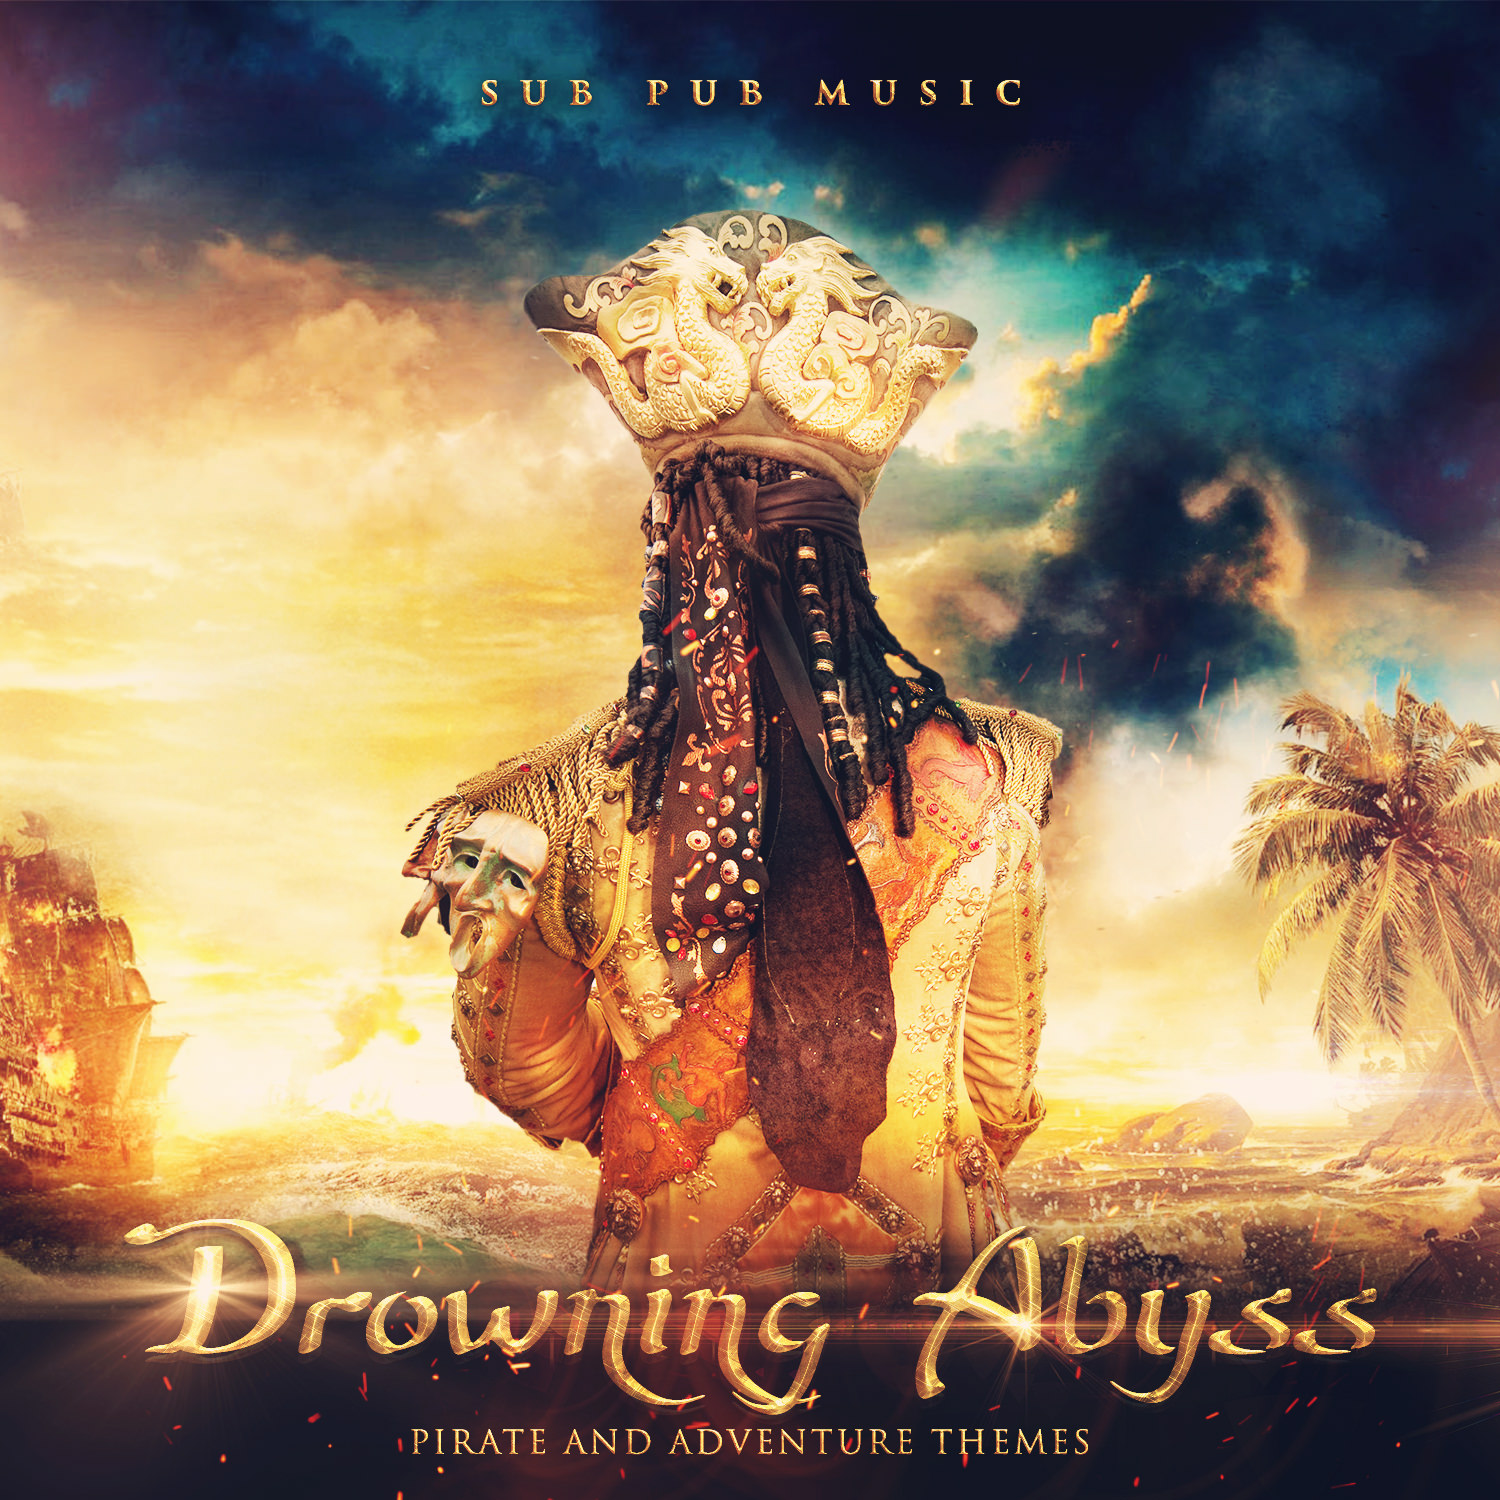 Copy of Sub Pub Music - Drowning Abyss - Cody Still - Composer - Music